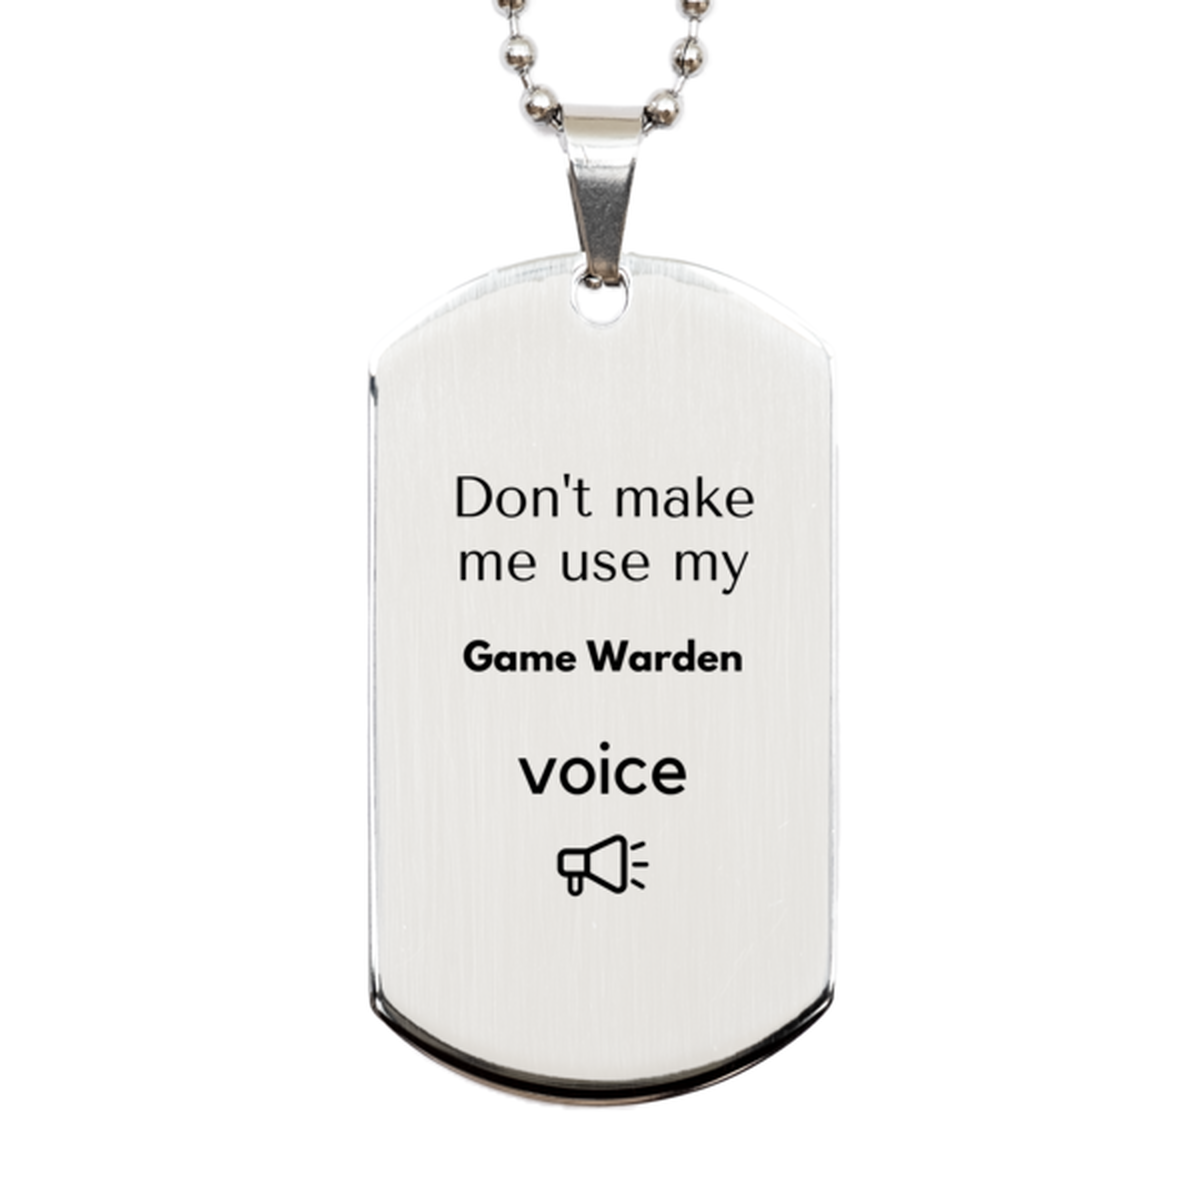 Don't make me use my Game Warden voice, Sarcasm Game Warden Gifts, Christmas Game Warden Silver Dog Tag Birthday Unique Gifts For Game Warden Coworkers, Men, Women, Colleague, Friends